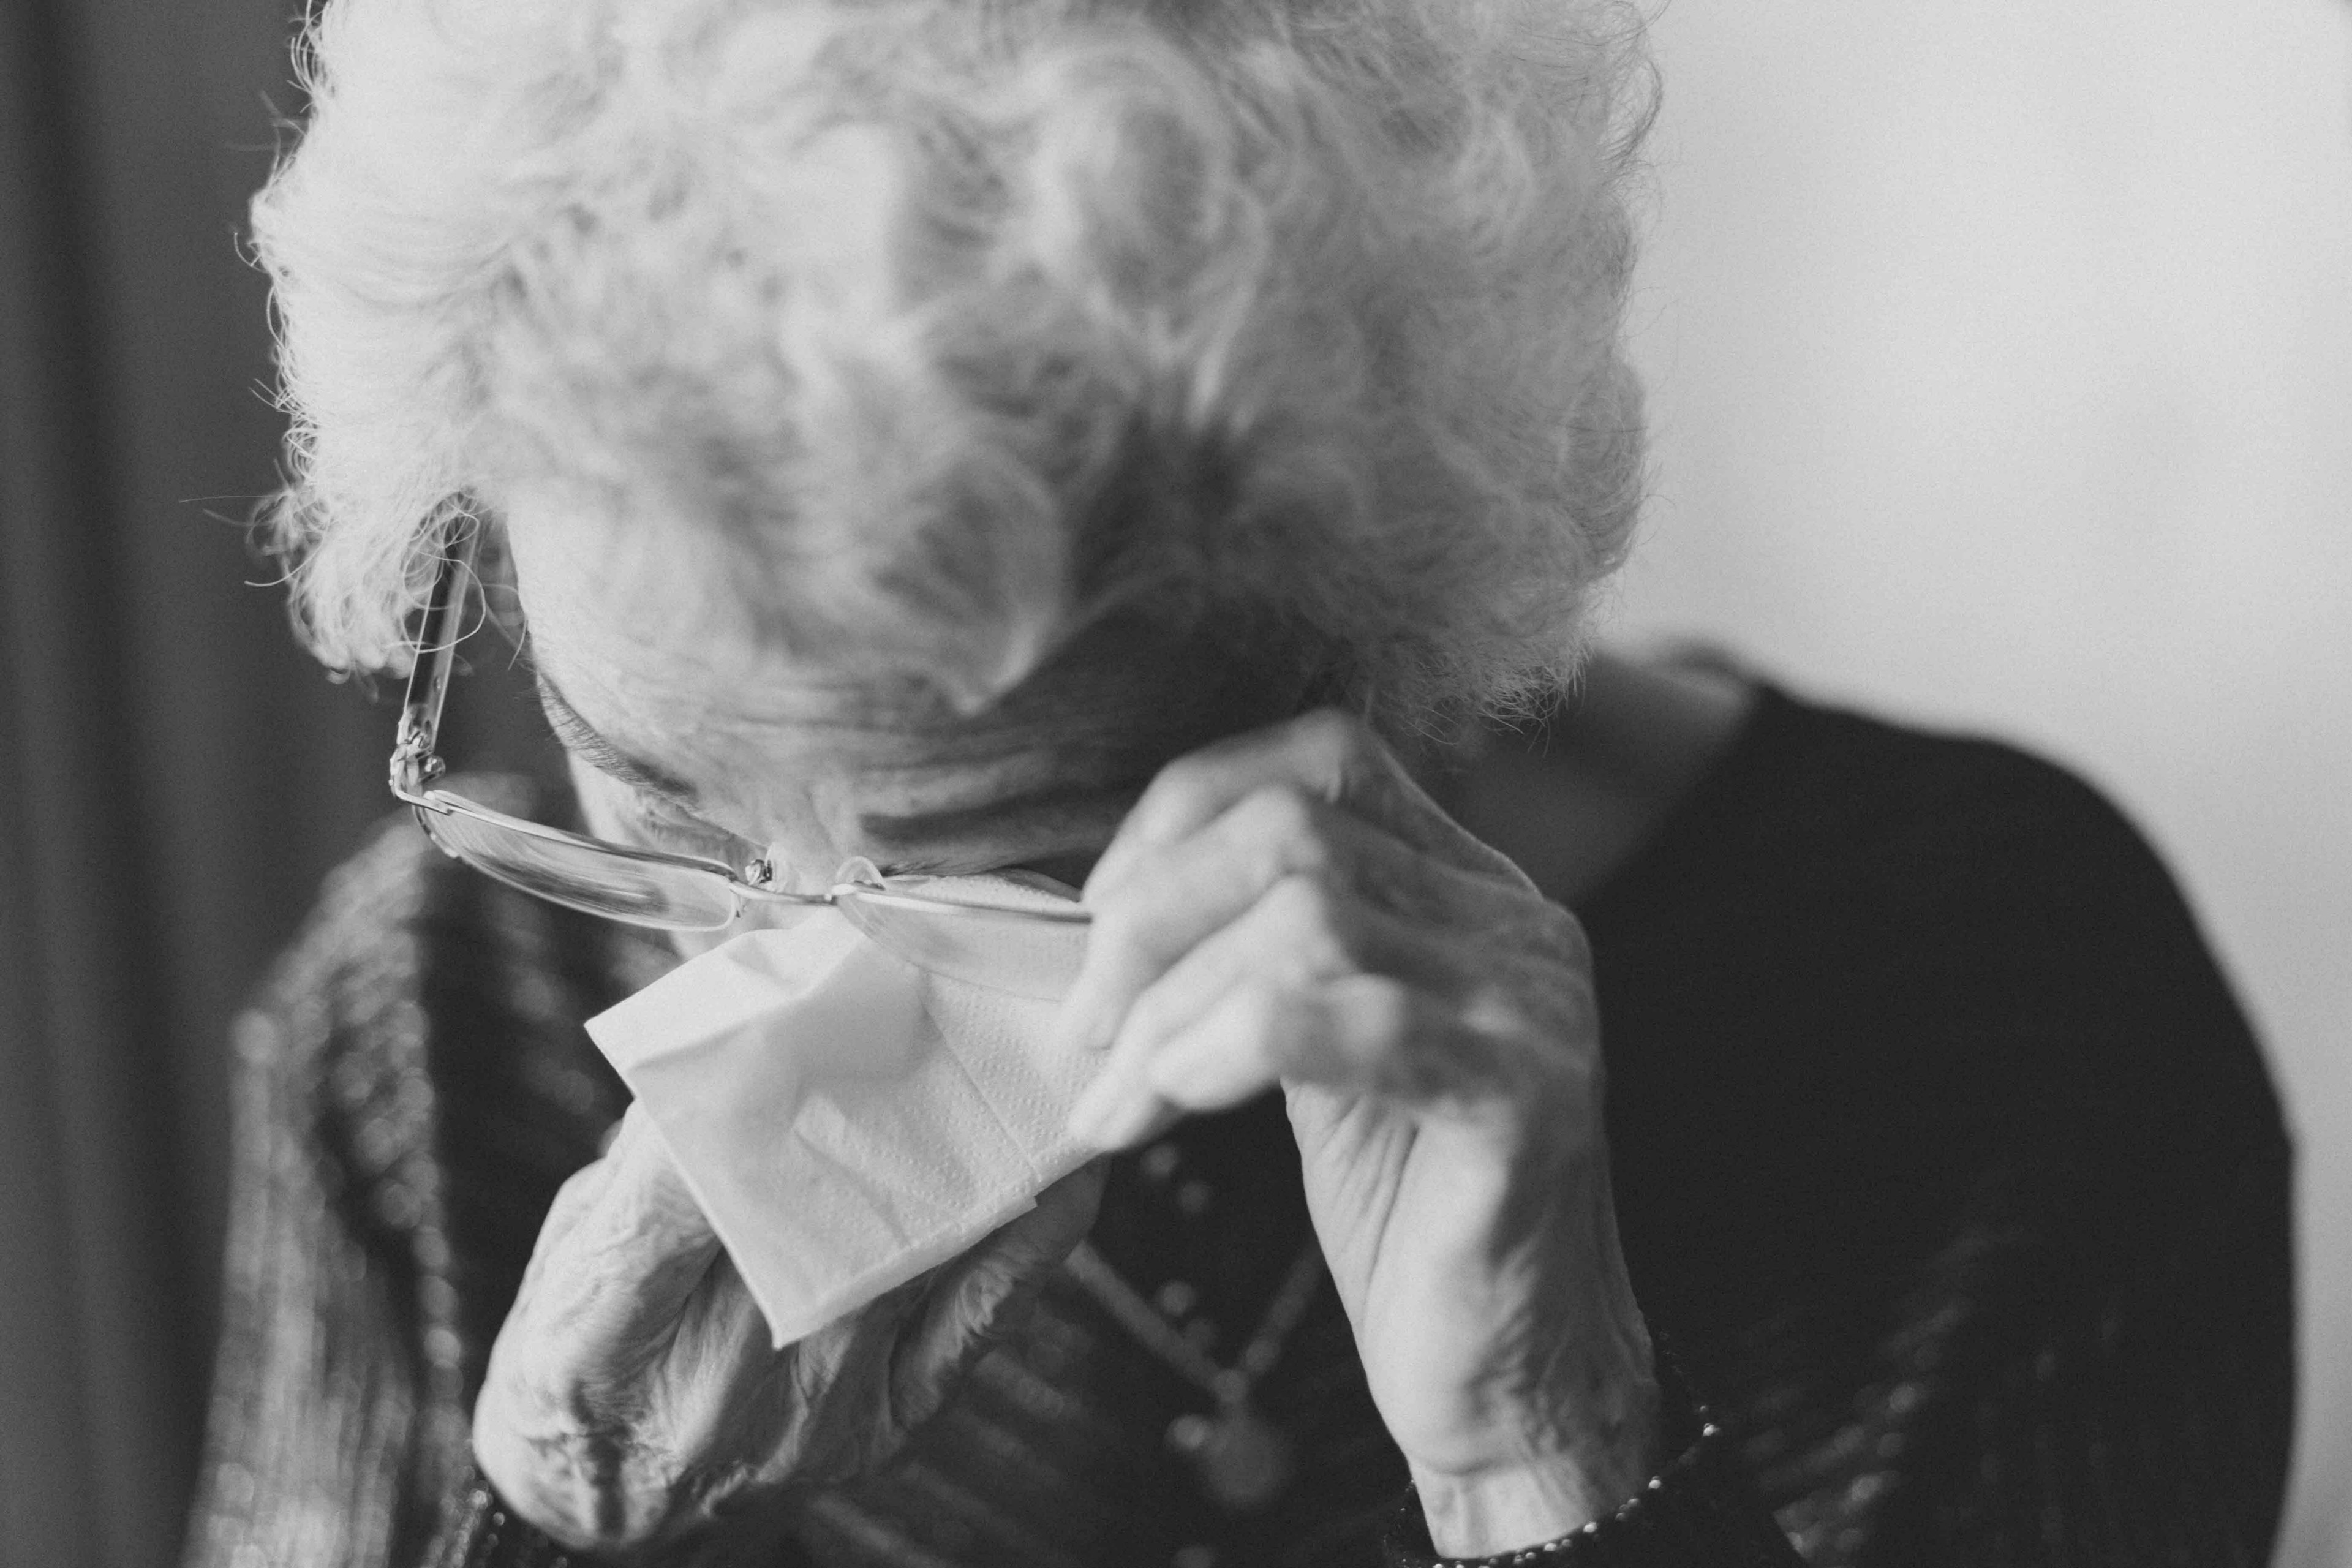 #3840x2560 Old Lady Removing Her Spectacles To Wipe , HD Wallpaper & Backgrounds